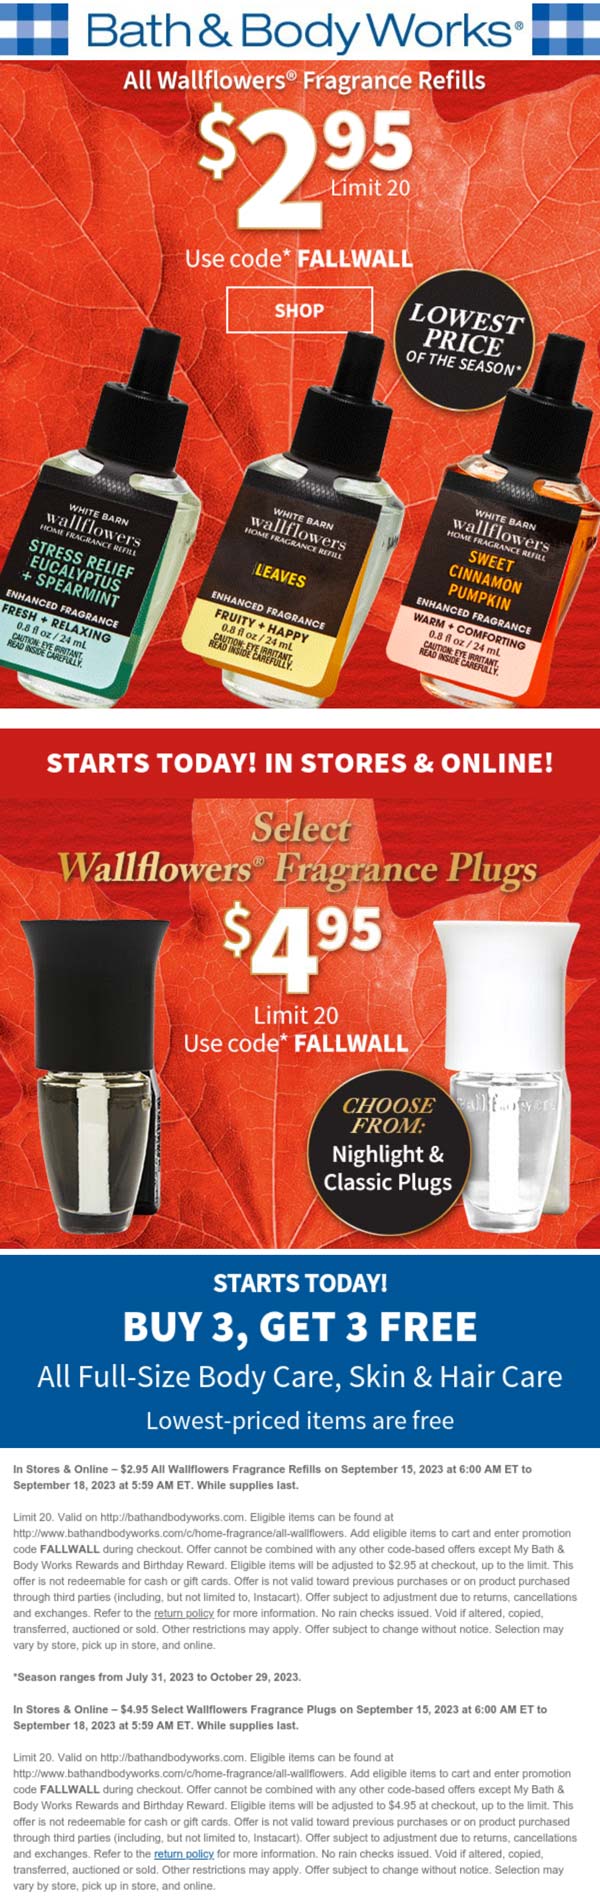 Bath & Body Works stores Coupon  $3 refills & 6-for-3 lotions at Bath & Body Works, or online via promo code FALLWALL #bathbodyworks 